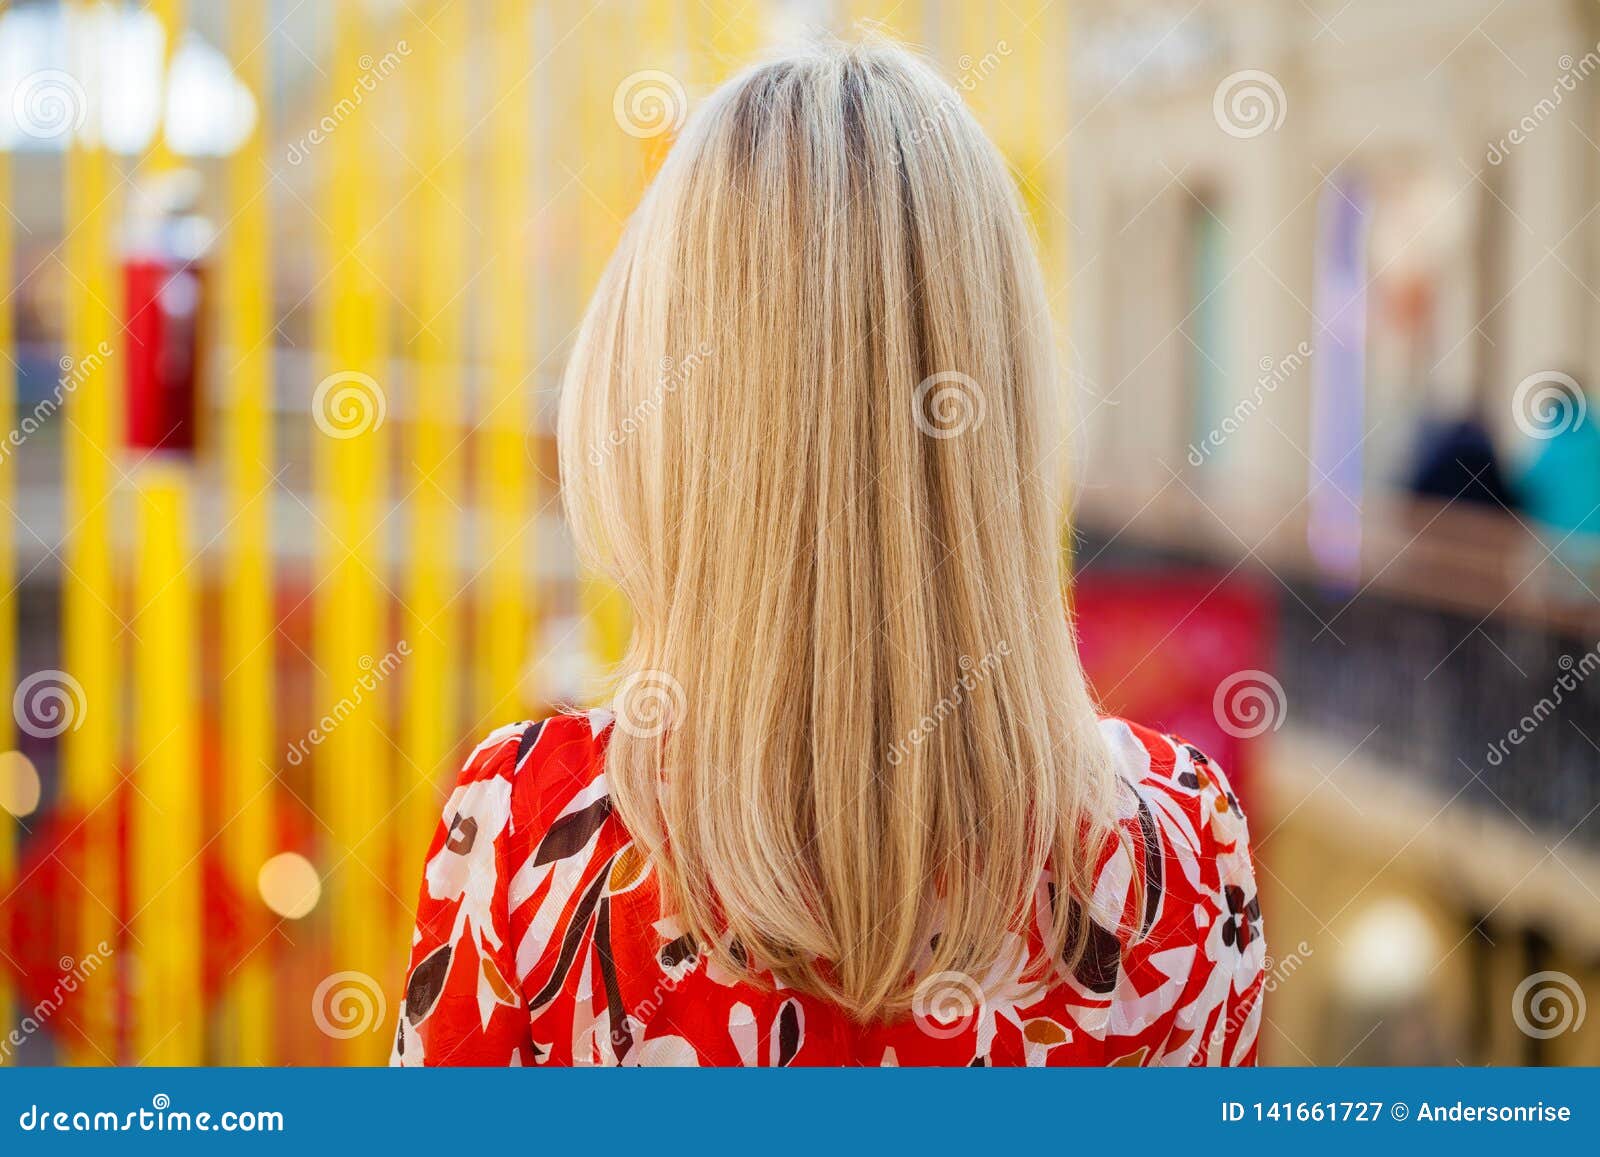 Blonde woman with braided hair from behind - wide 4